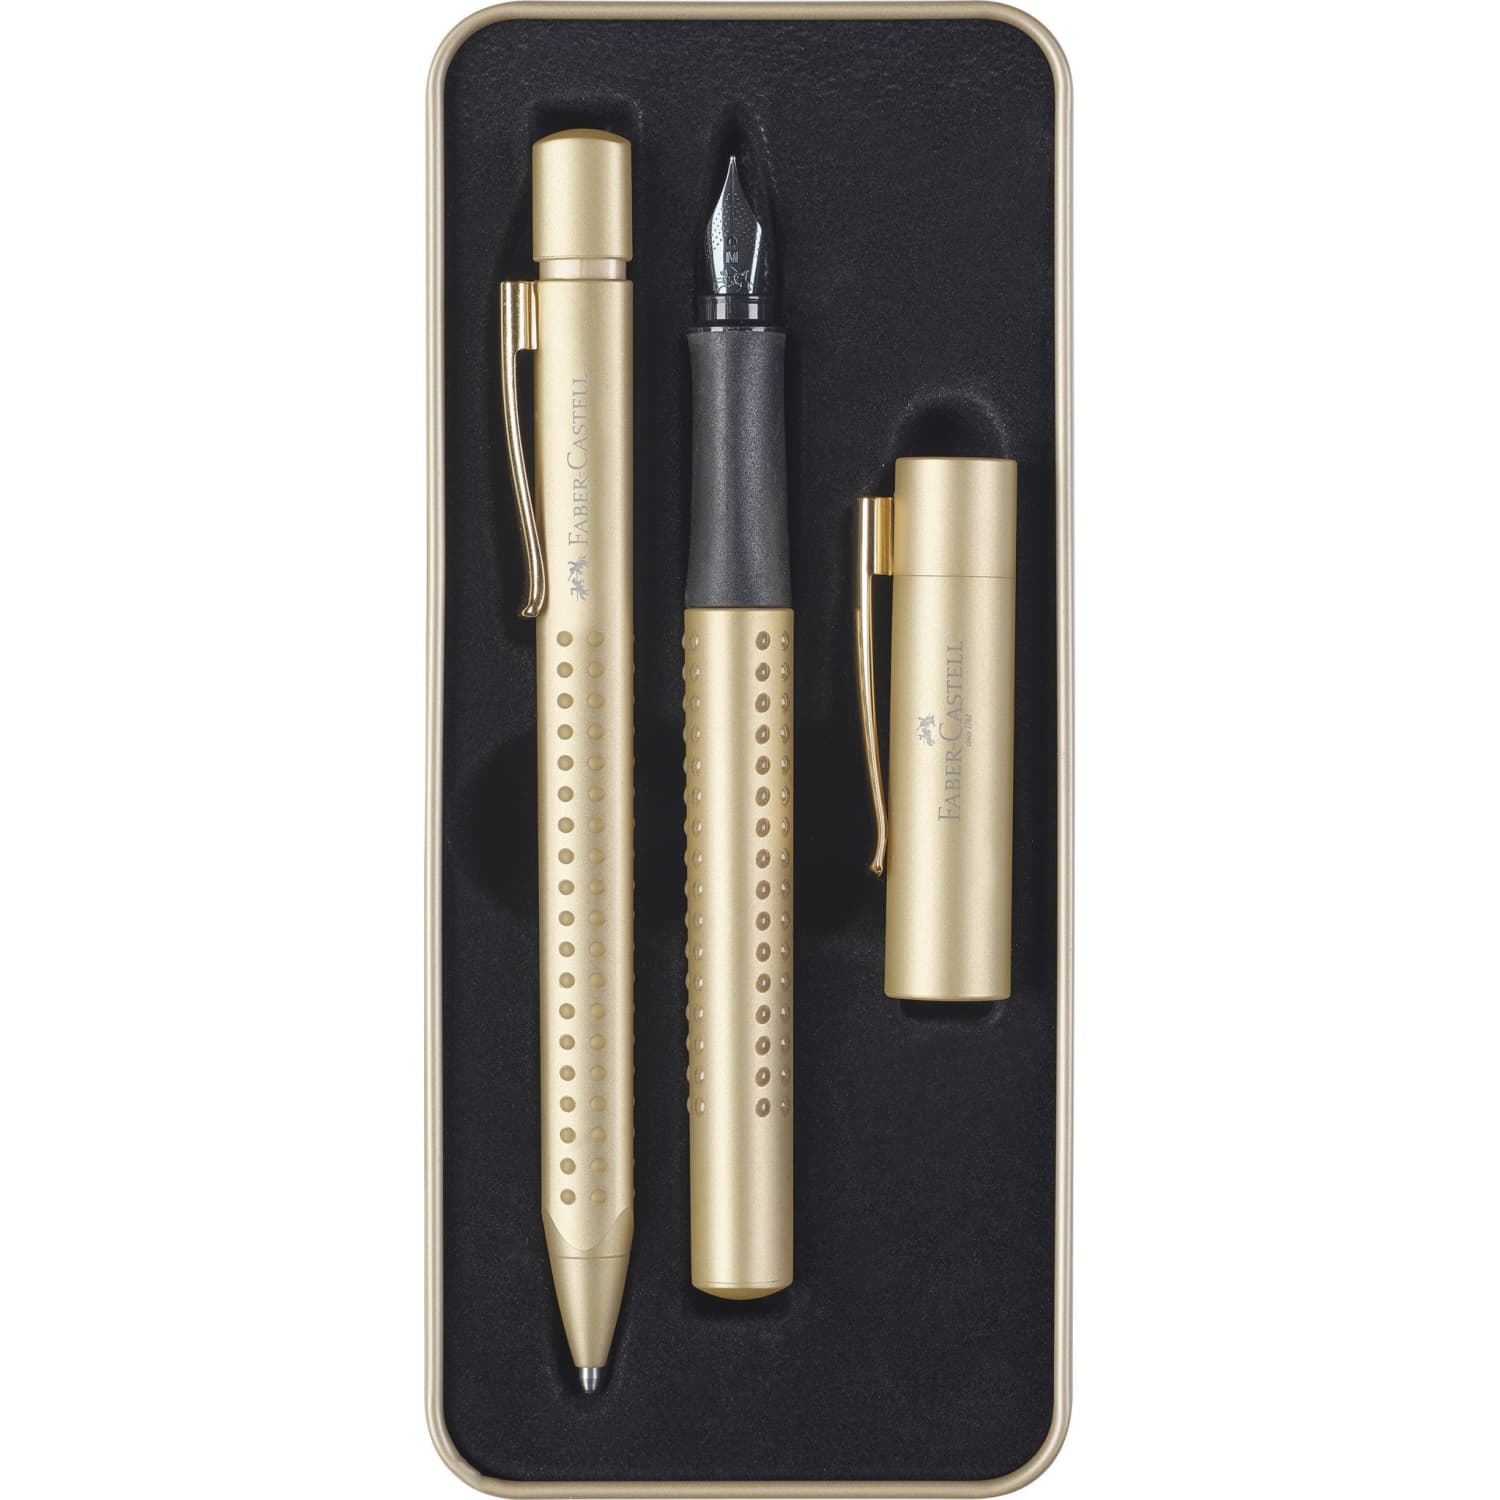 Graf Von Faber-Castell 2011 Pen Of The Year Available For